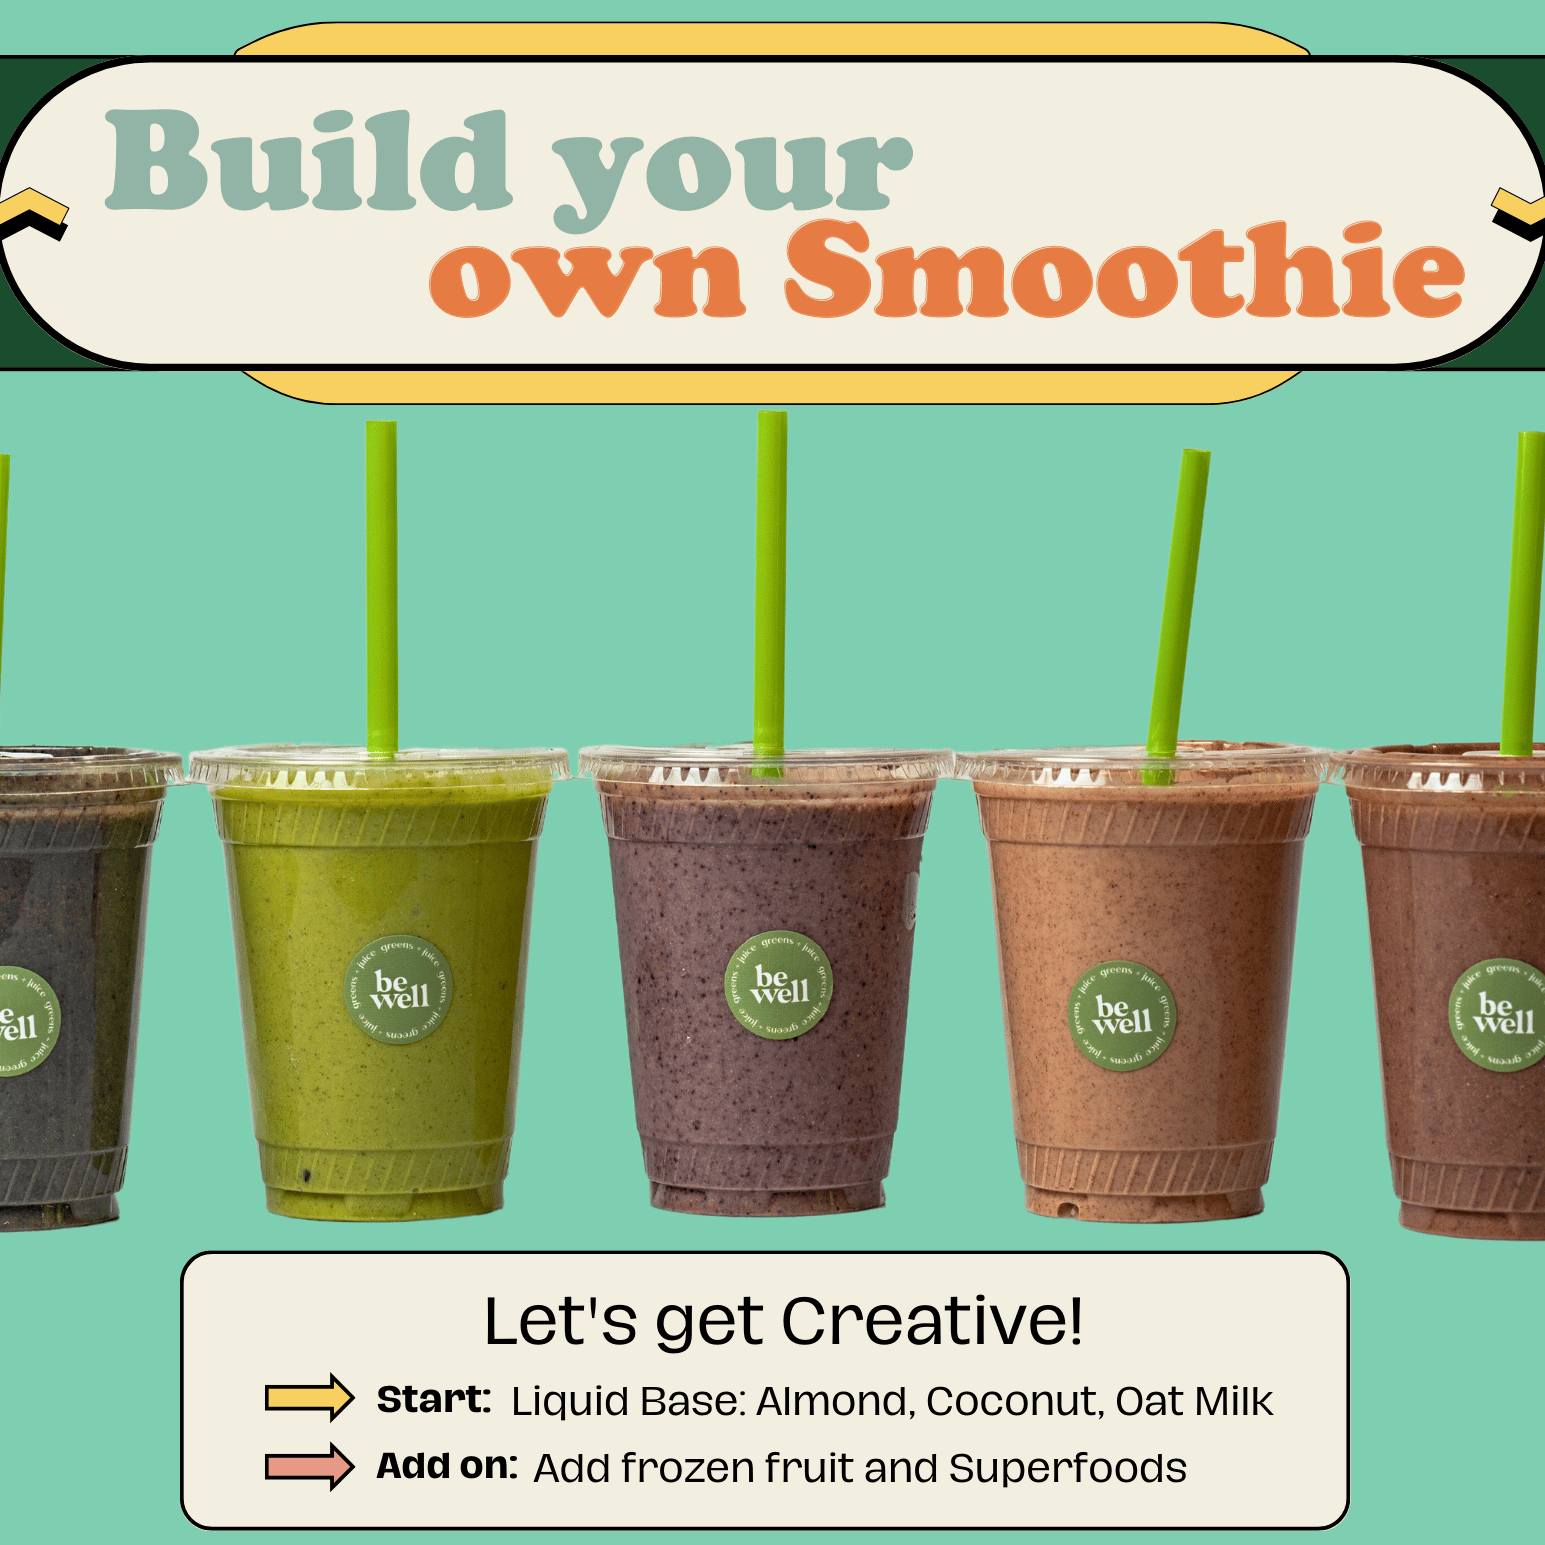 Build your own smoothie